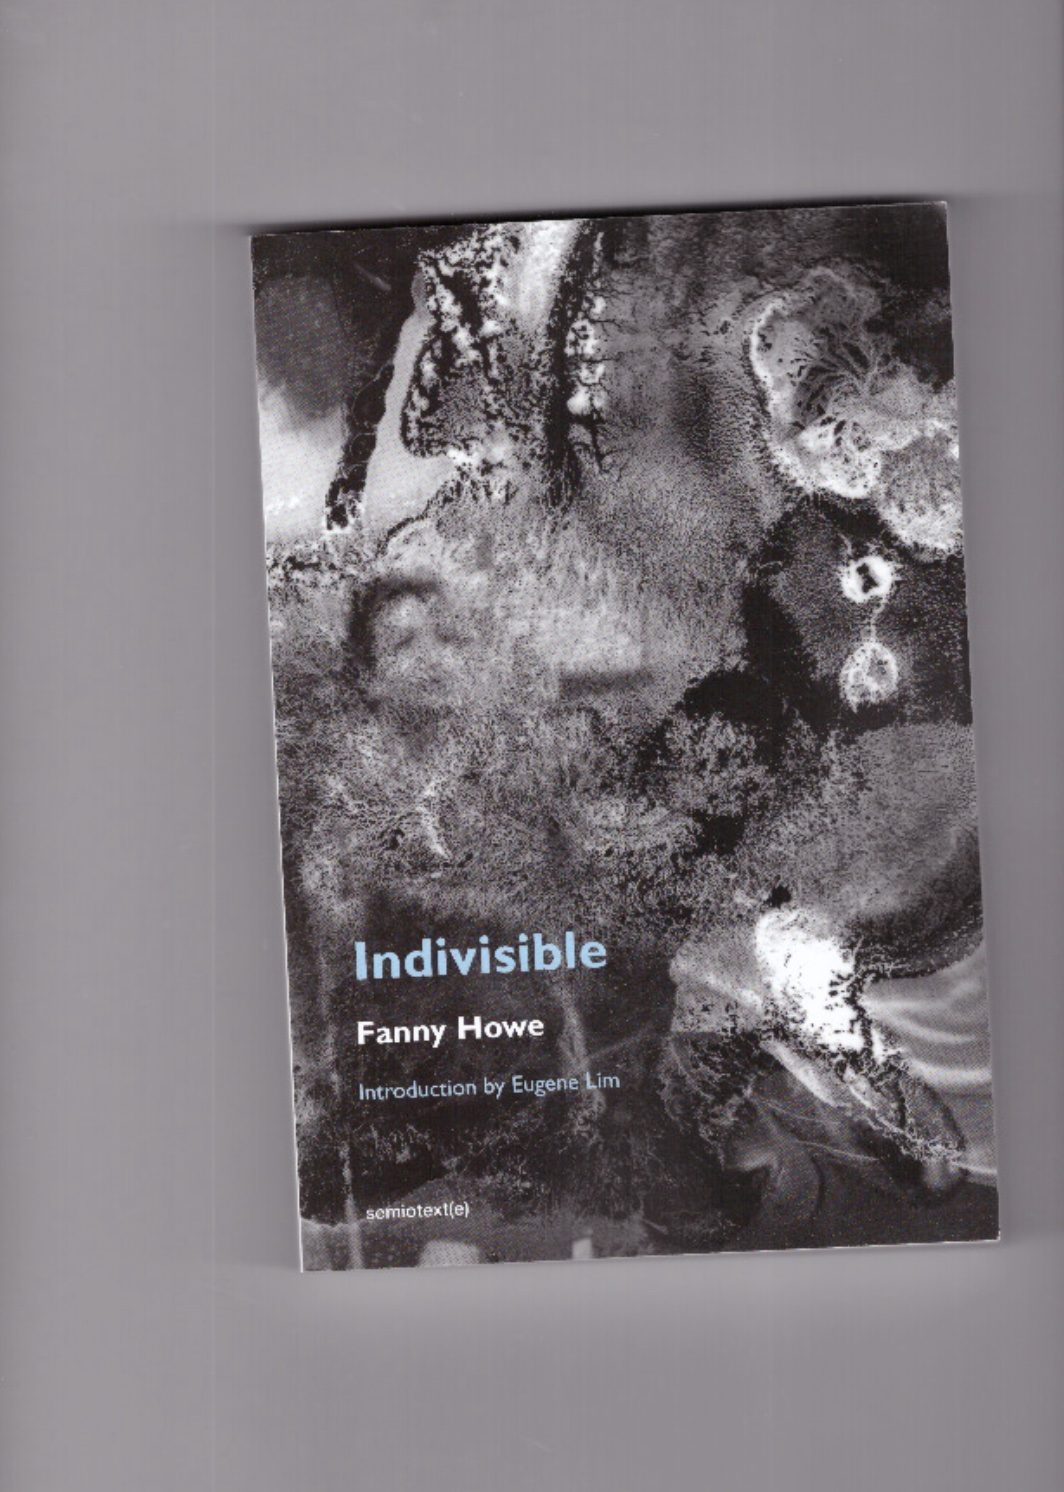 HOWE, Fanny - Indivisible (New Edition)